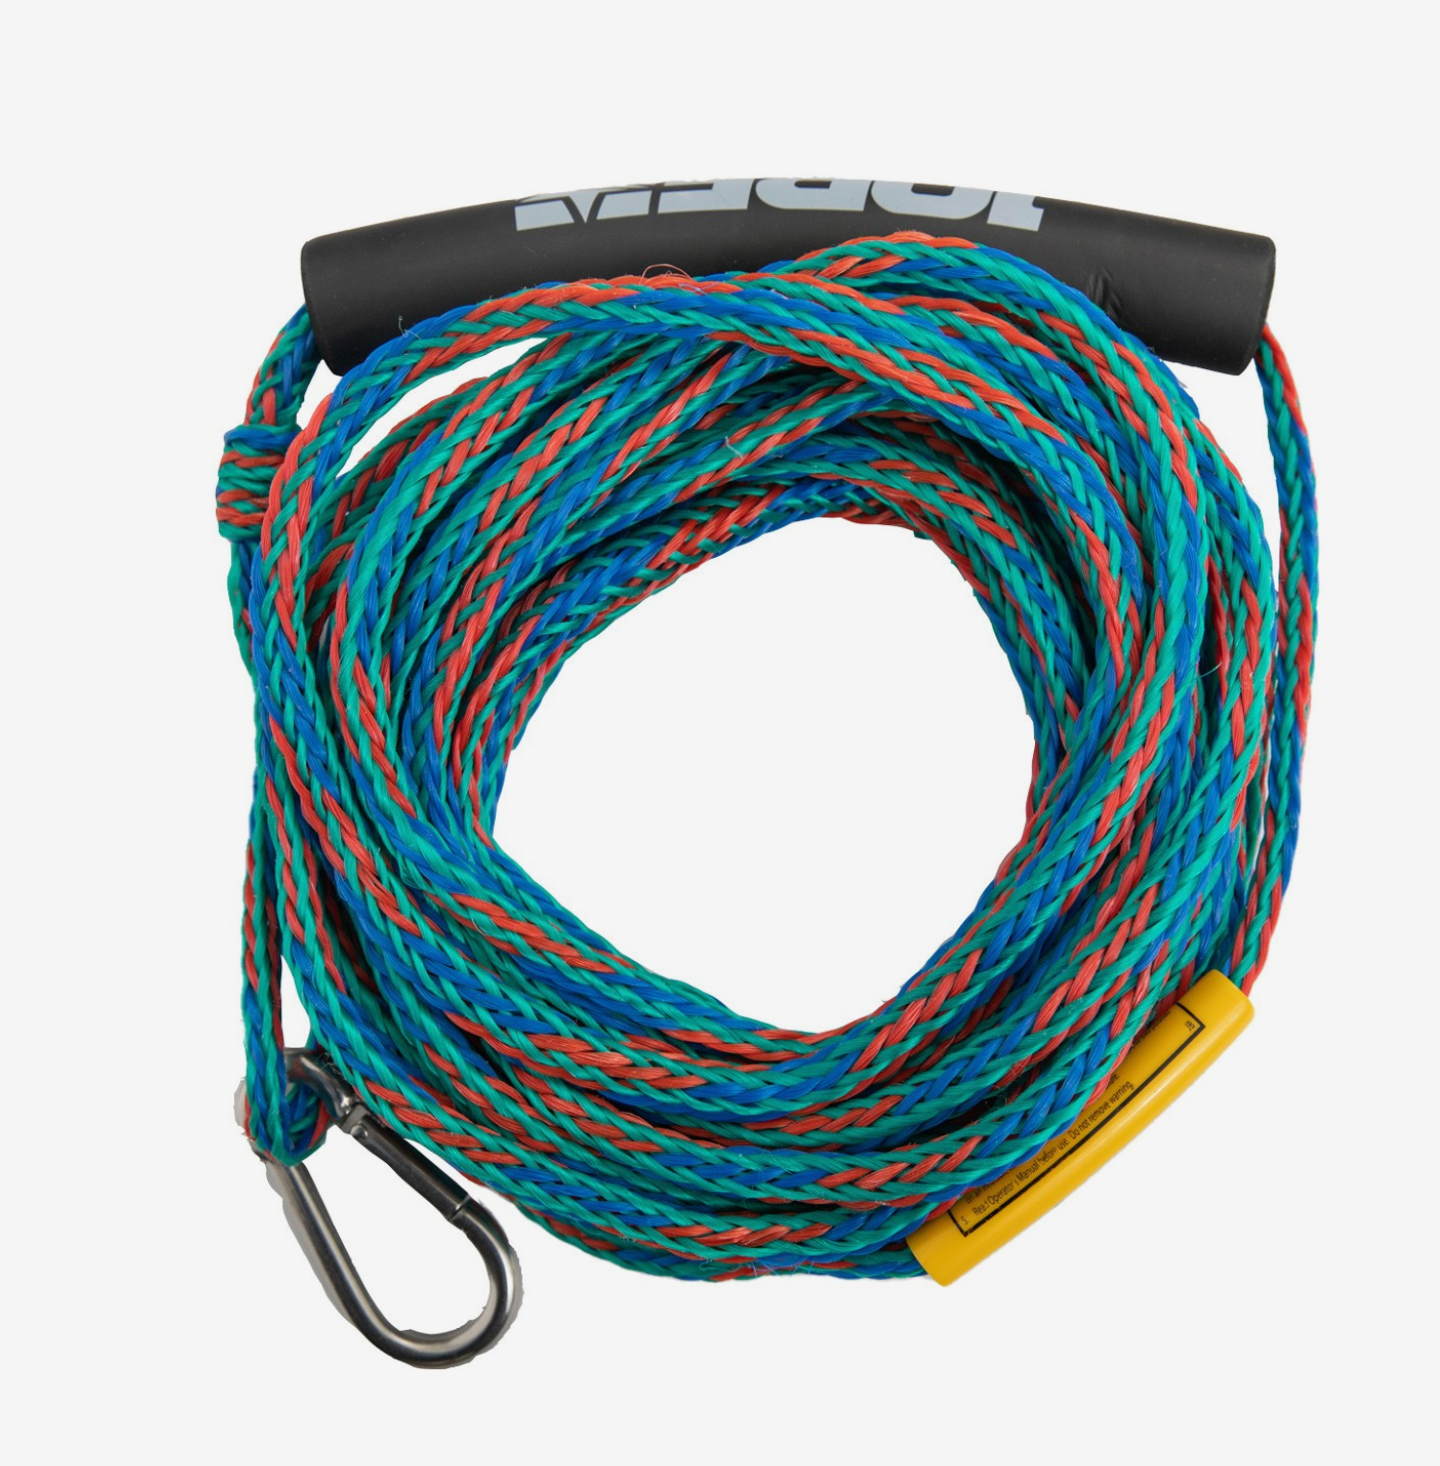 JOBE 2 Person Towable Rope